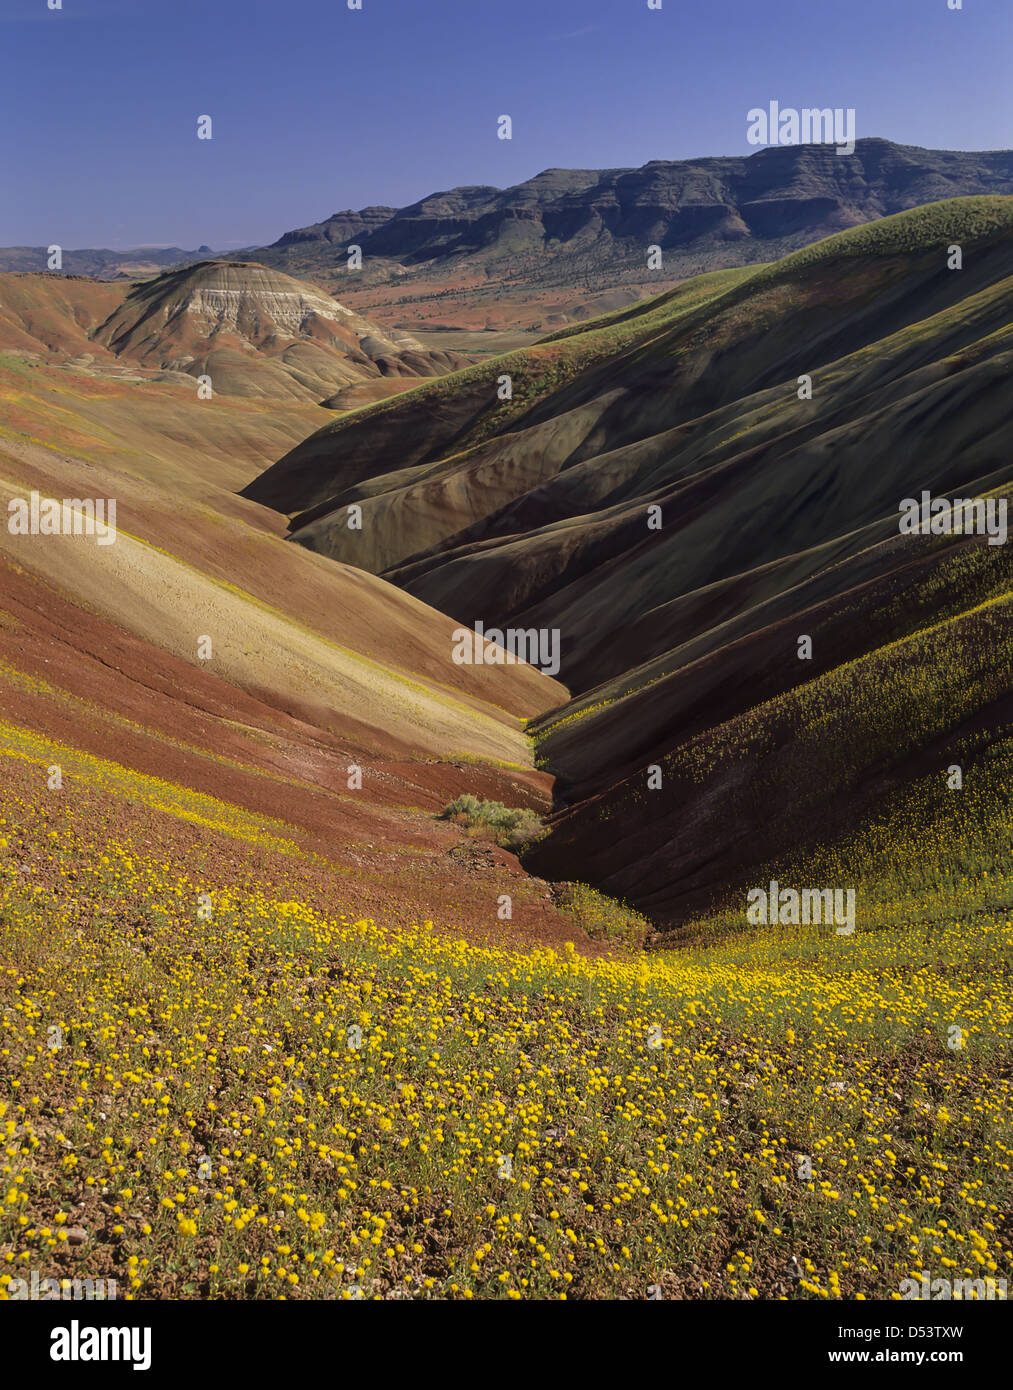 USA, Oregon, John Day Fossil Beds National Monument. Chaenactis flowers line volcanic claystone slopes of the Painted Hills Unit Stock Photo